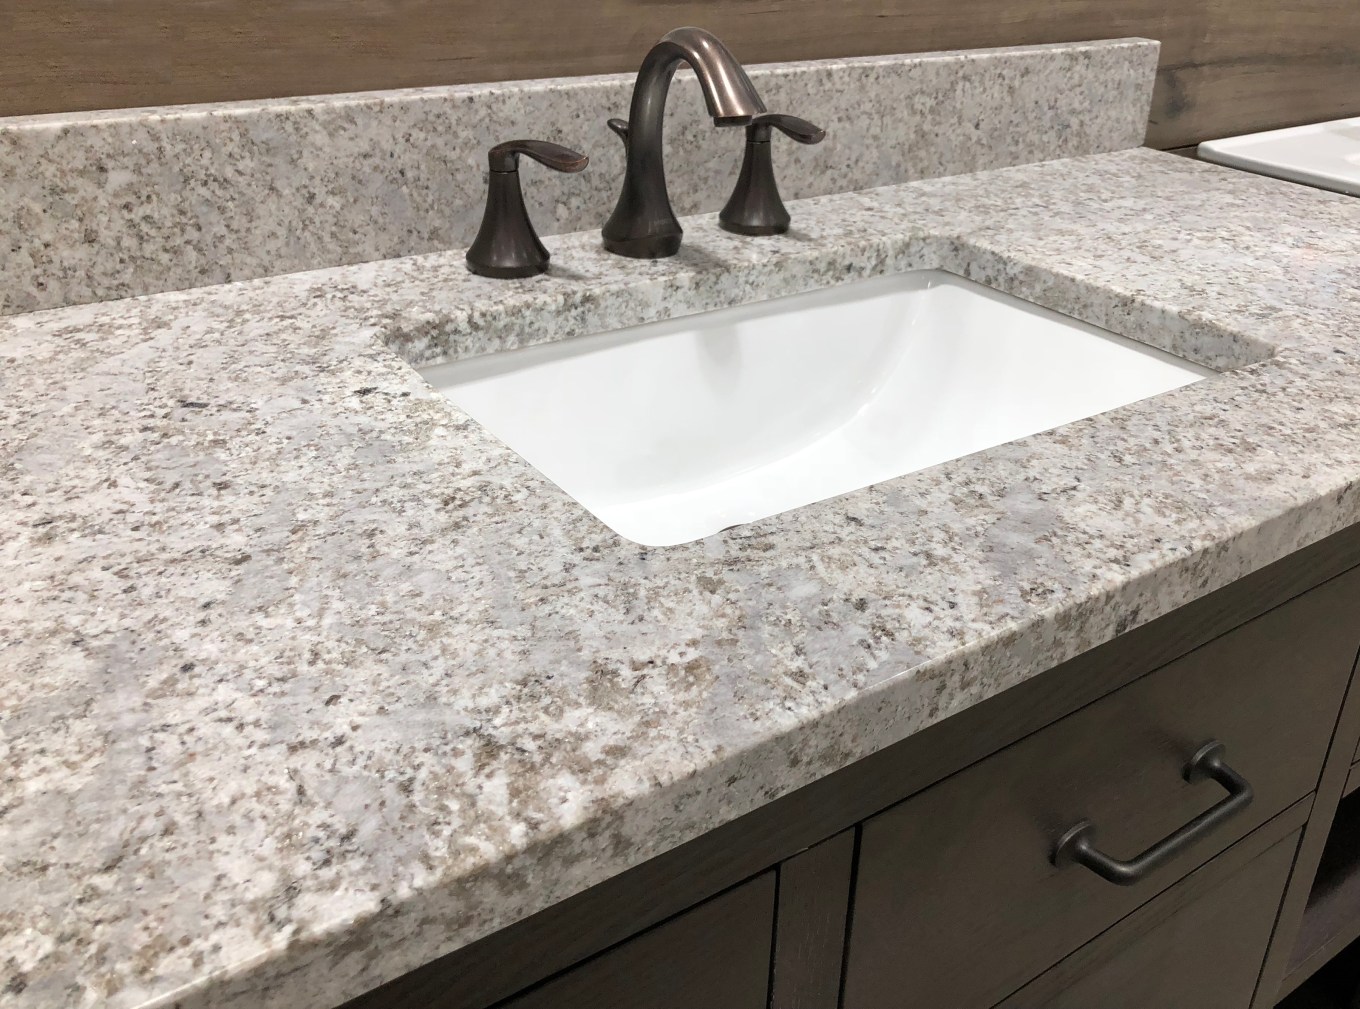 Granite bathroom counter over wooden vanity cabinet featuring a single sink.